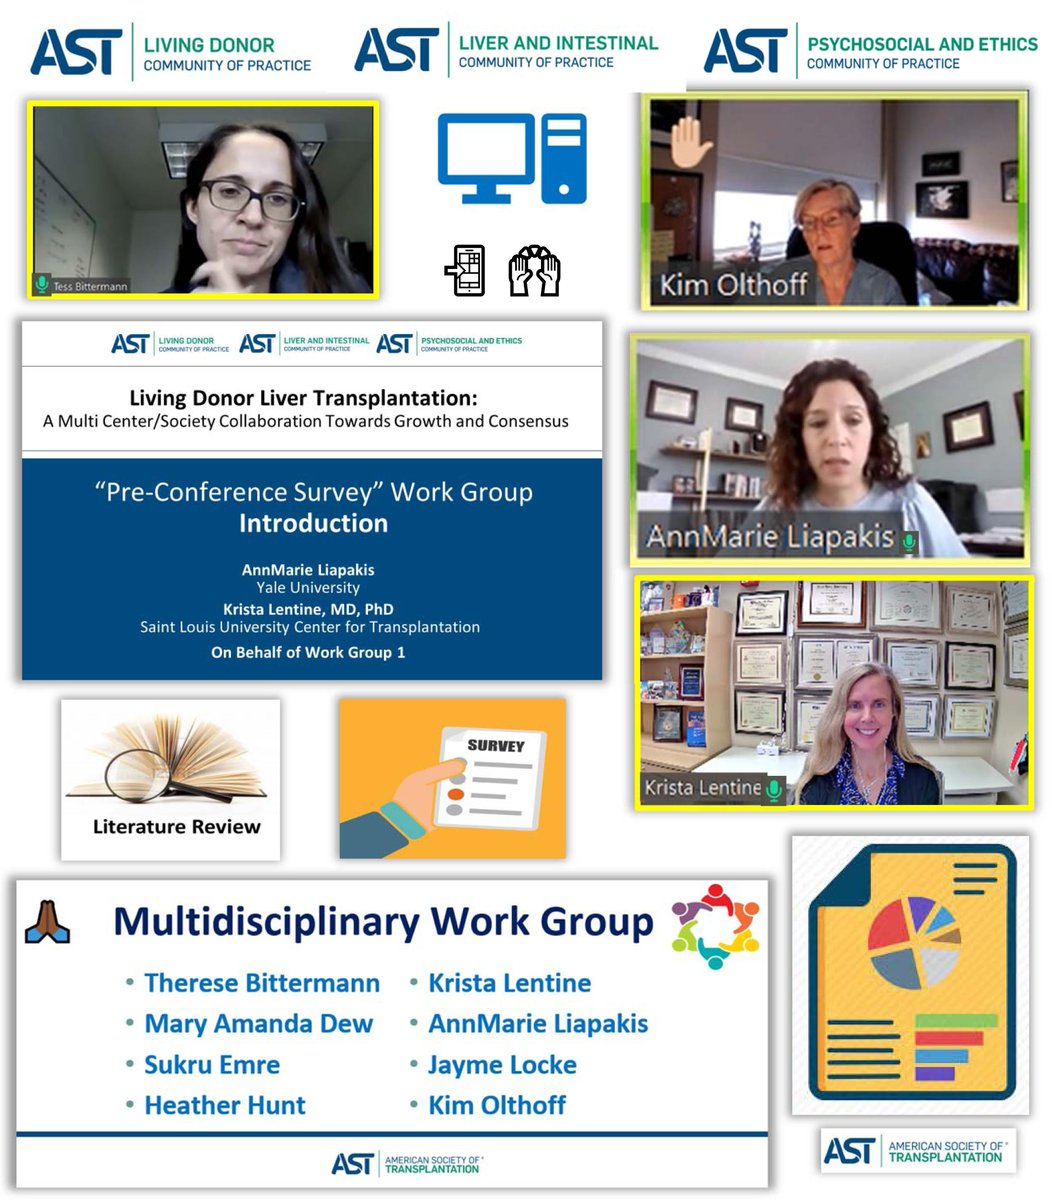 Honored to co-present ‘Current Status of #LivingDonor #Liver #Transplantation, US & Abroad’ w/ WG1 co-chair @AMLiapakis at @AST_info Virtual Consensus Conference Day1
•🙏🏾WG1 @KimOlthoff | Mary Amanda Dew | @HeatherFHunt | Sukru Emre | JaymeLocke for multidisciplinary expertise🙌🏾